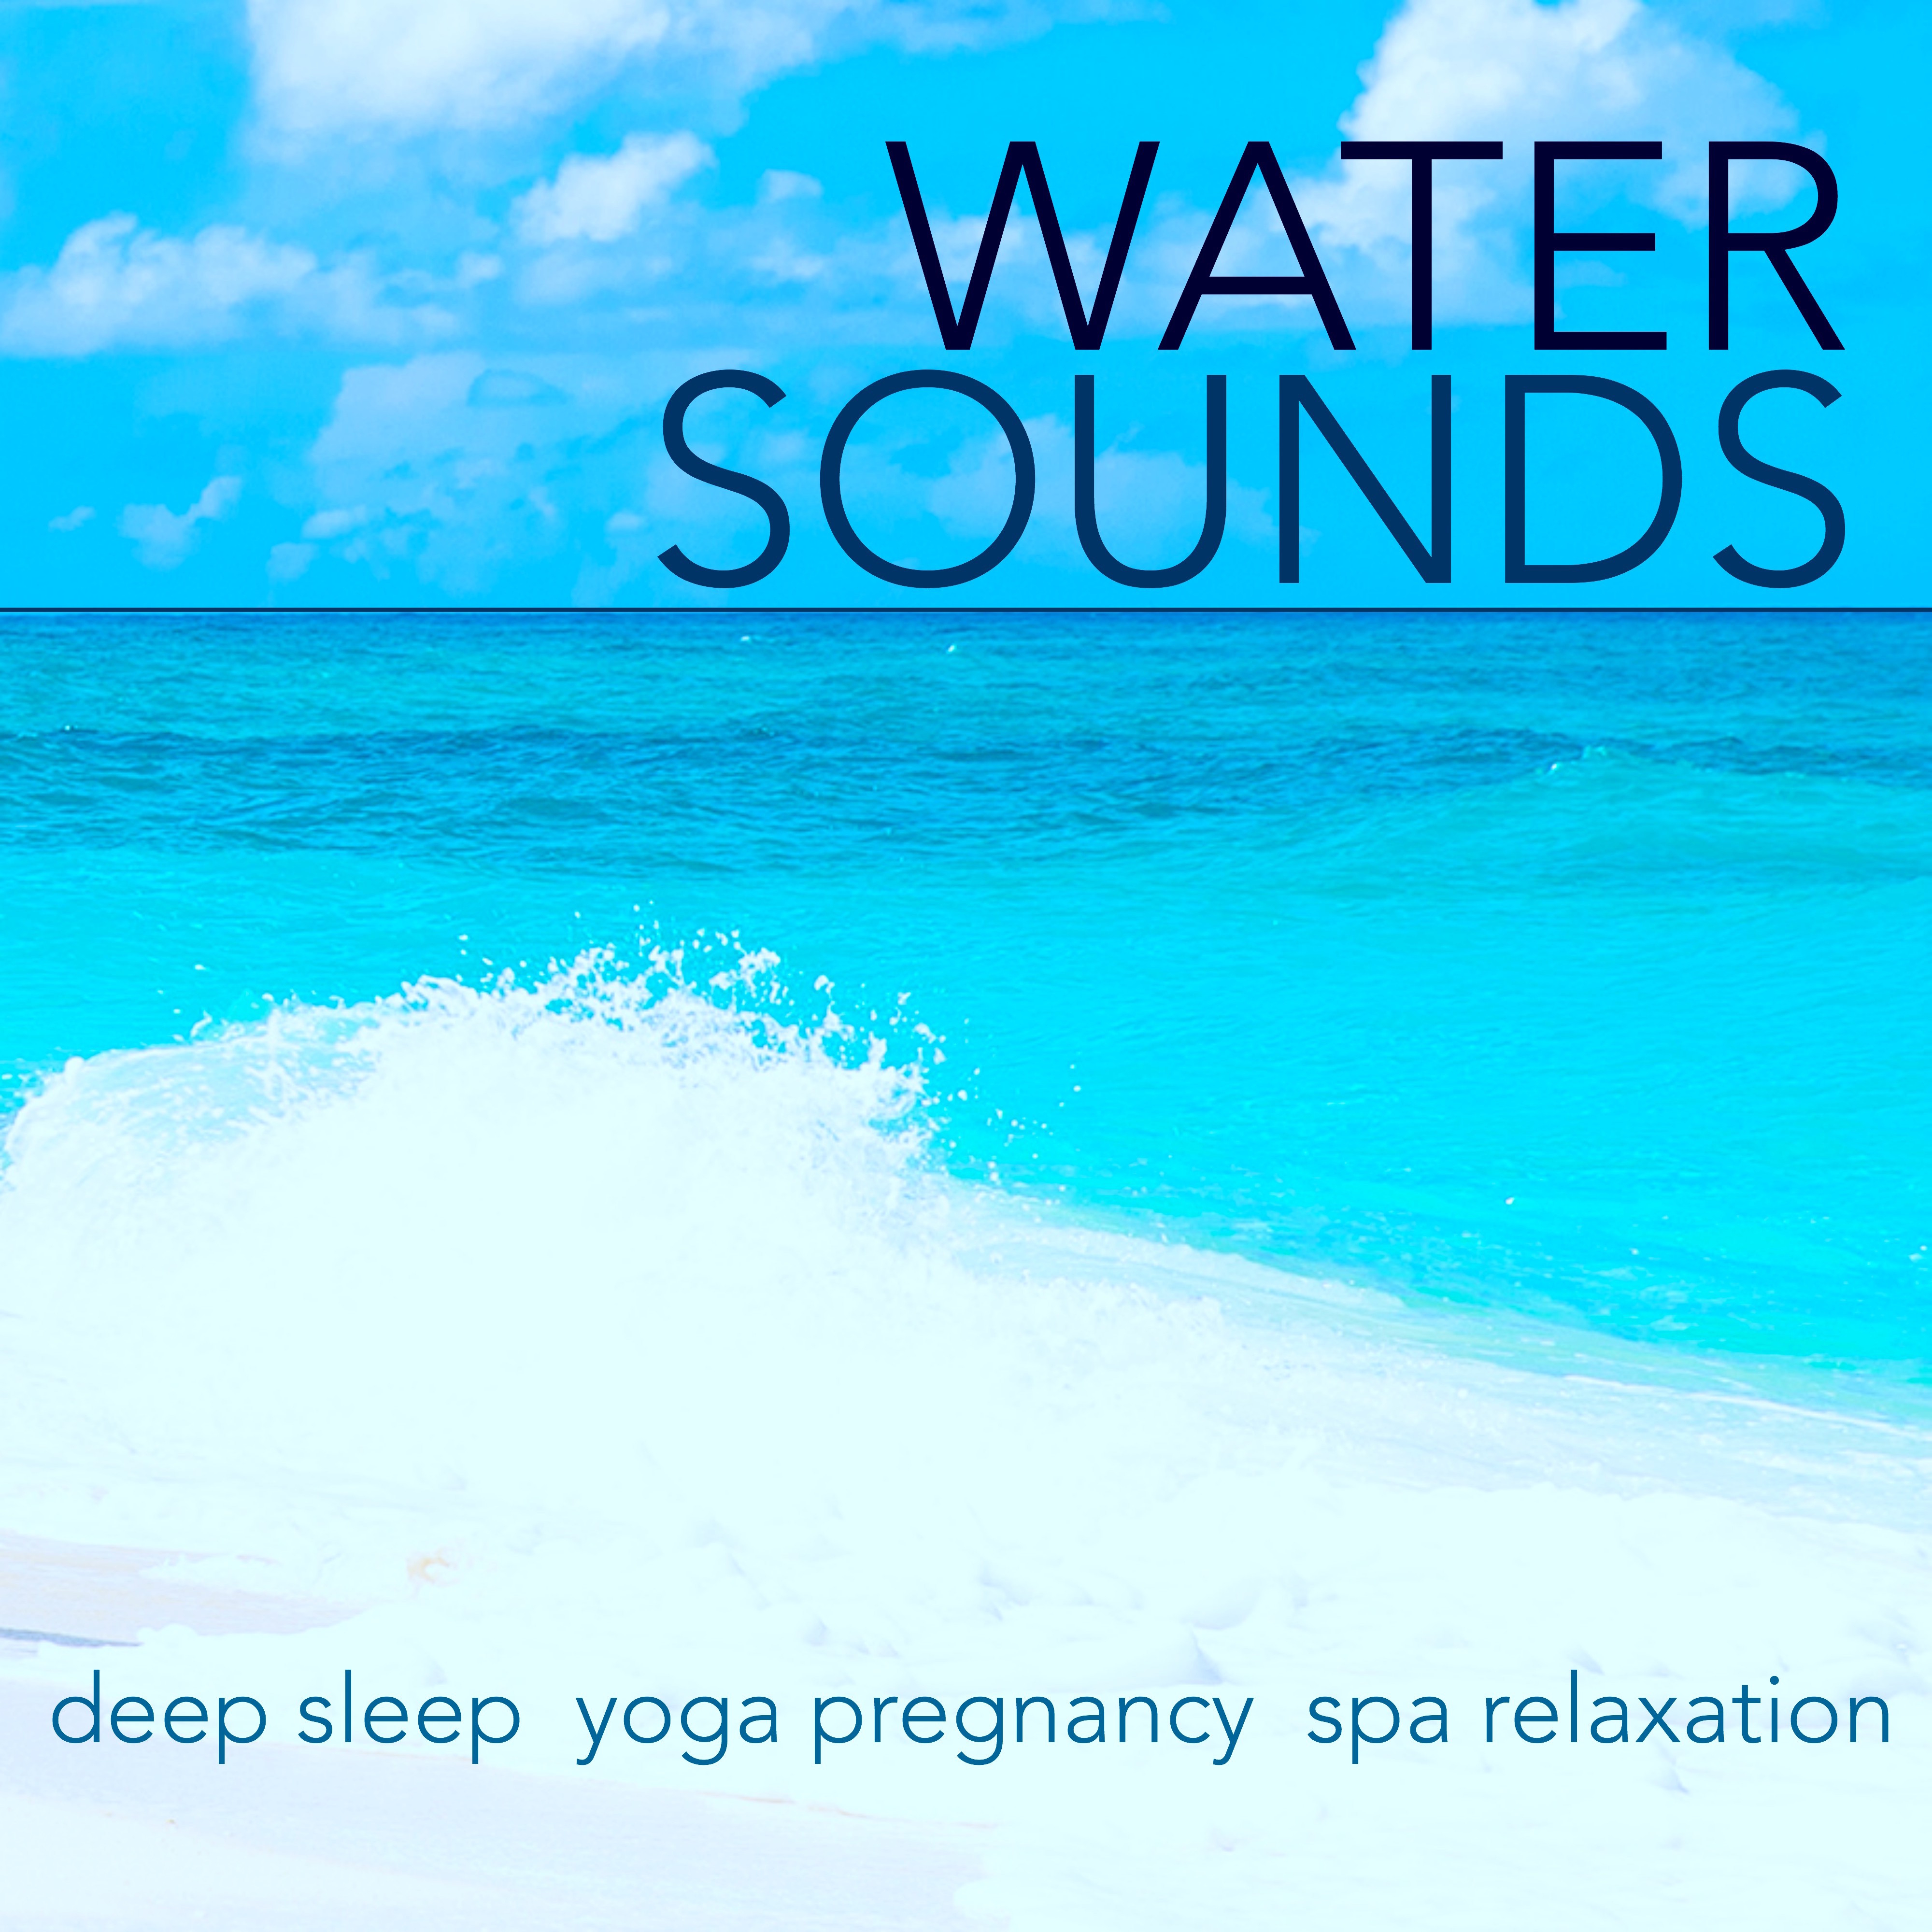 Water Sounds - Relaxing Nature Sounds & Nature Music for Deep Sleep, Baby Sleep, Yoga Pregnancy, Yoga Music Spa Relaxation Zen Meditation